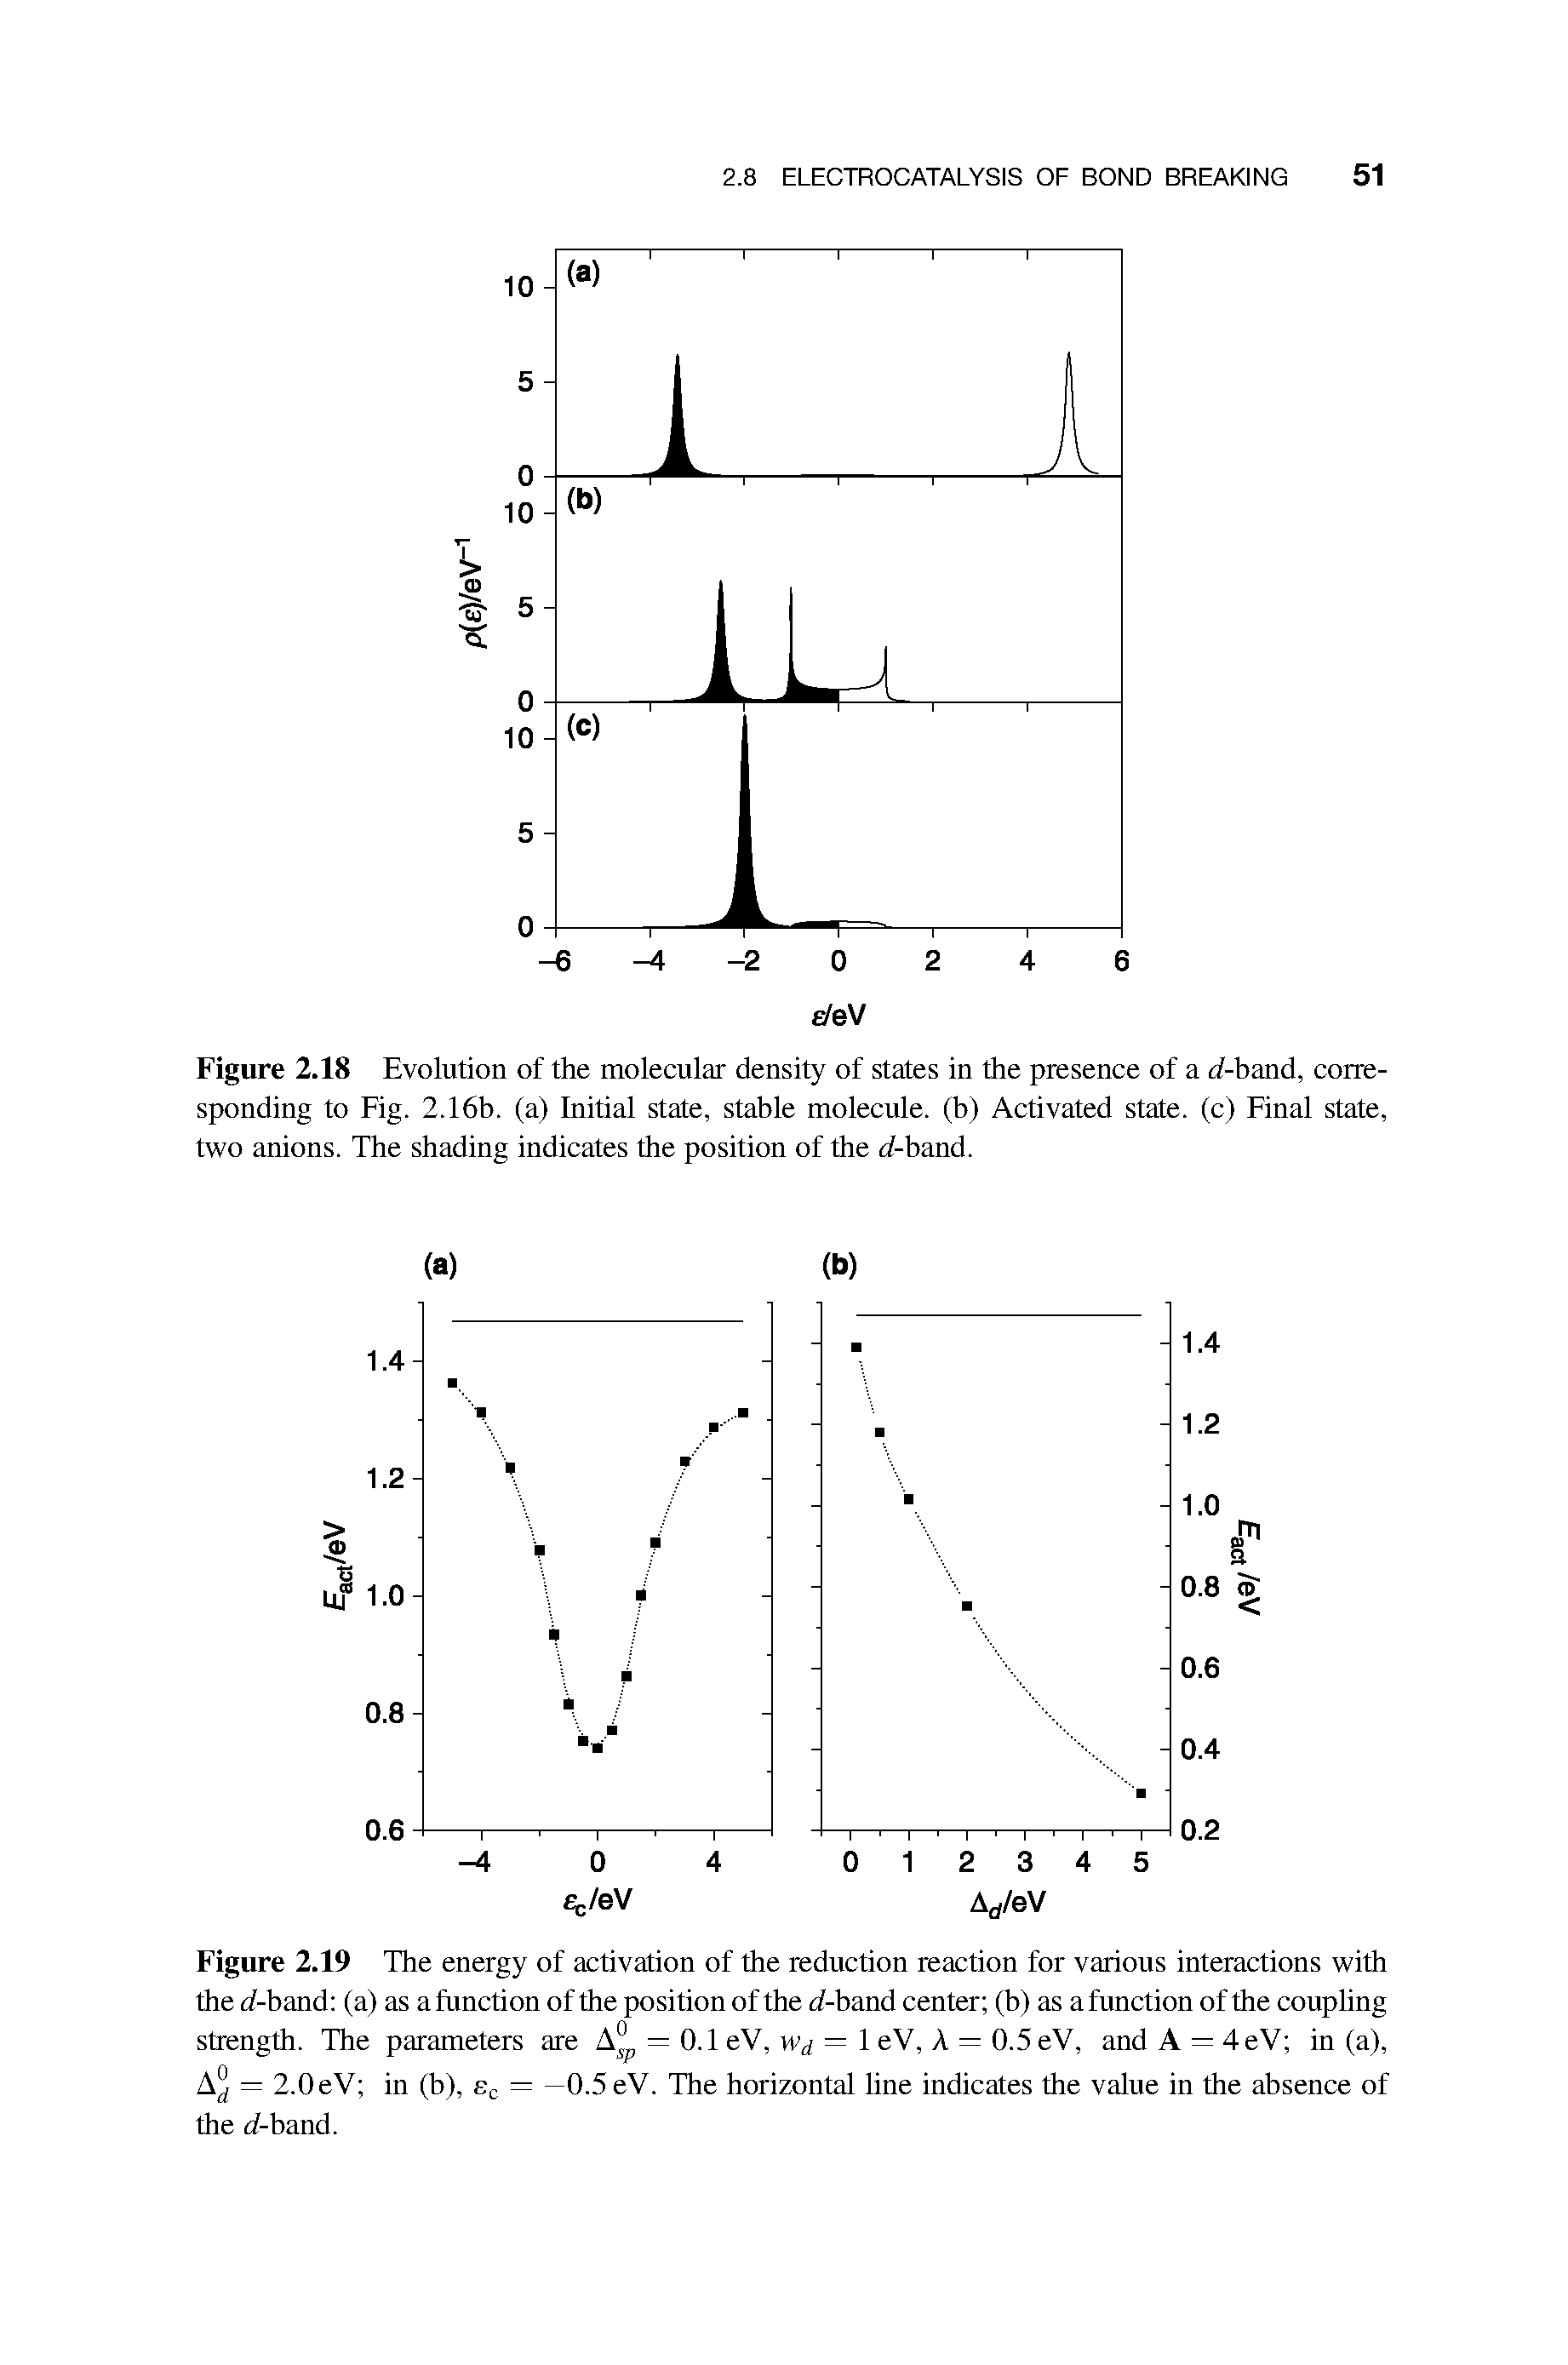 Figure 2.19 The energy of activation of the reduction reaction for various interactions with the d-band (a) as a function of the position of the d-band center (b) as a function of the coupling strength. The parameters are = 0.1 eV, Wd = 1 eV, A = 0.5eV, and A = 4eV in (a), = 2.0eV in (b), = —0.5 eV. The horizontal line indicates the value in the absence of...